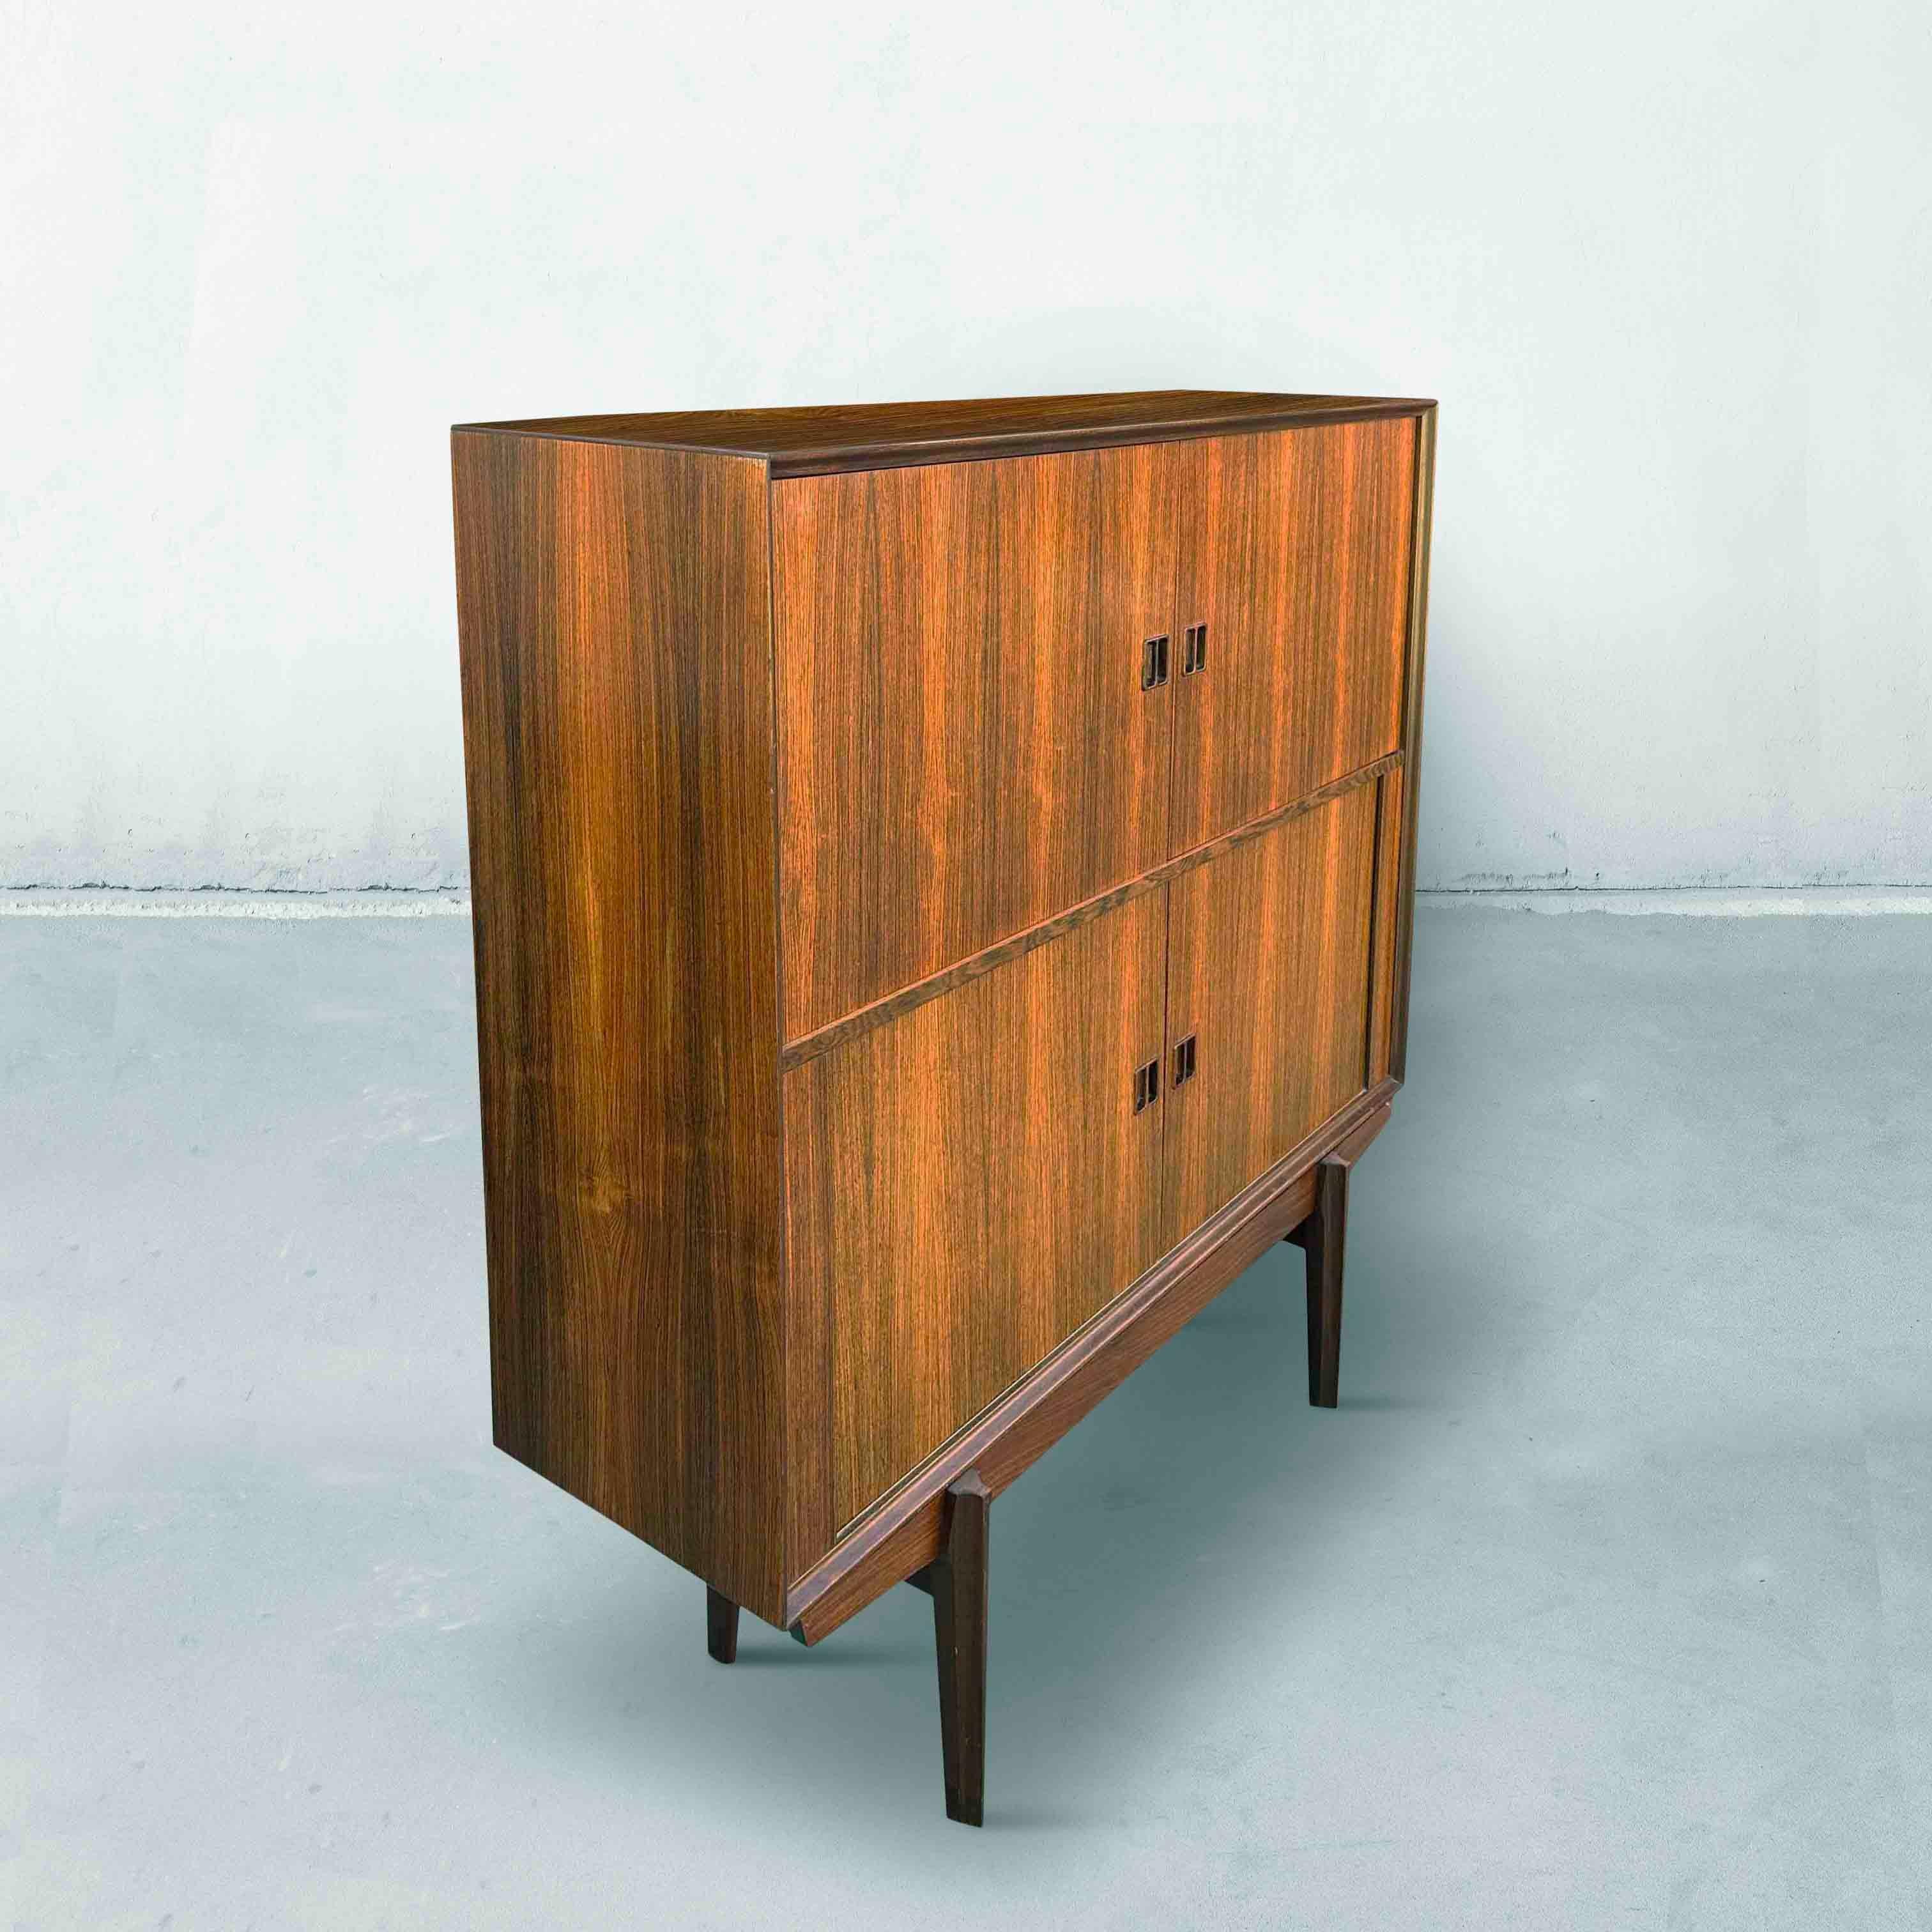 A beautiful bar cabinet by Oswald Vermaercke for V-Form from the 1960s. This sideboard has two regular doors at the top and two sliding doors (or tambour doors) at the bottom. In very good condition, with normal signs of use. See photos. The wiring